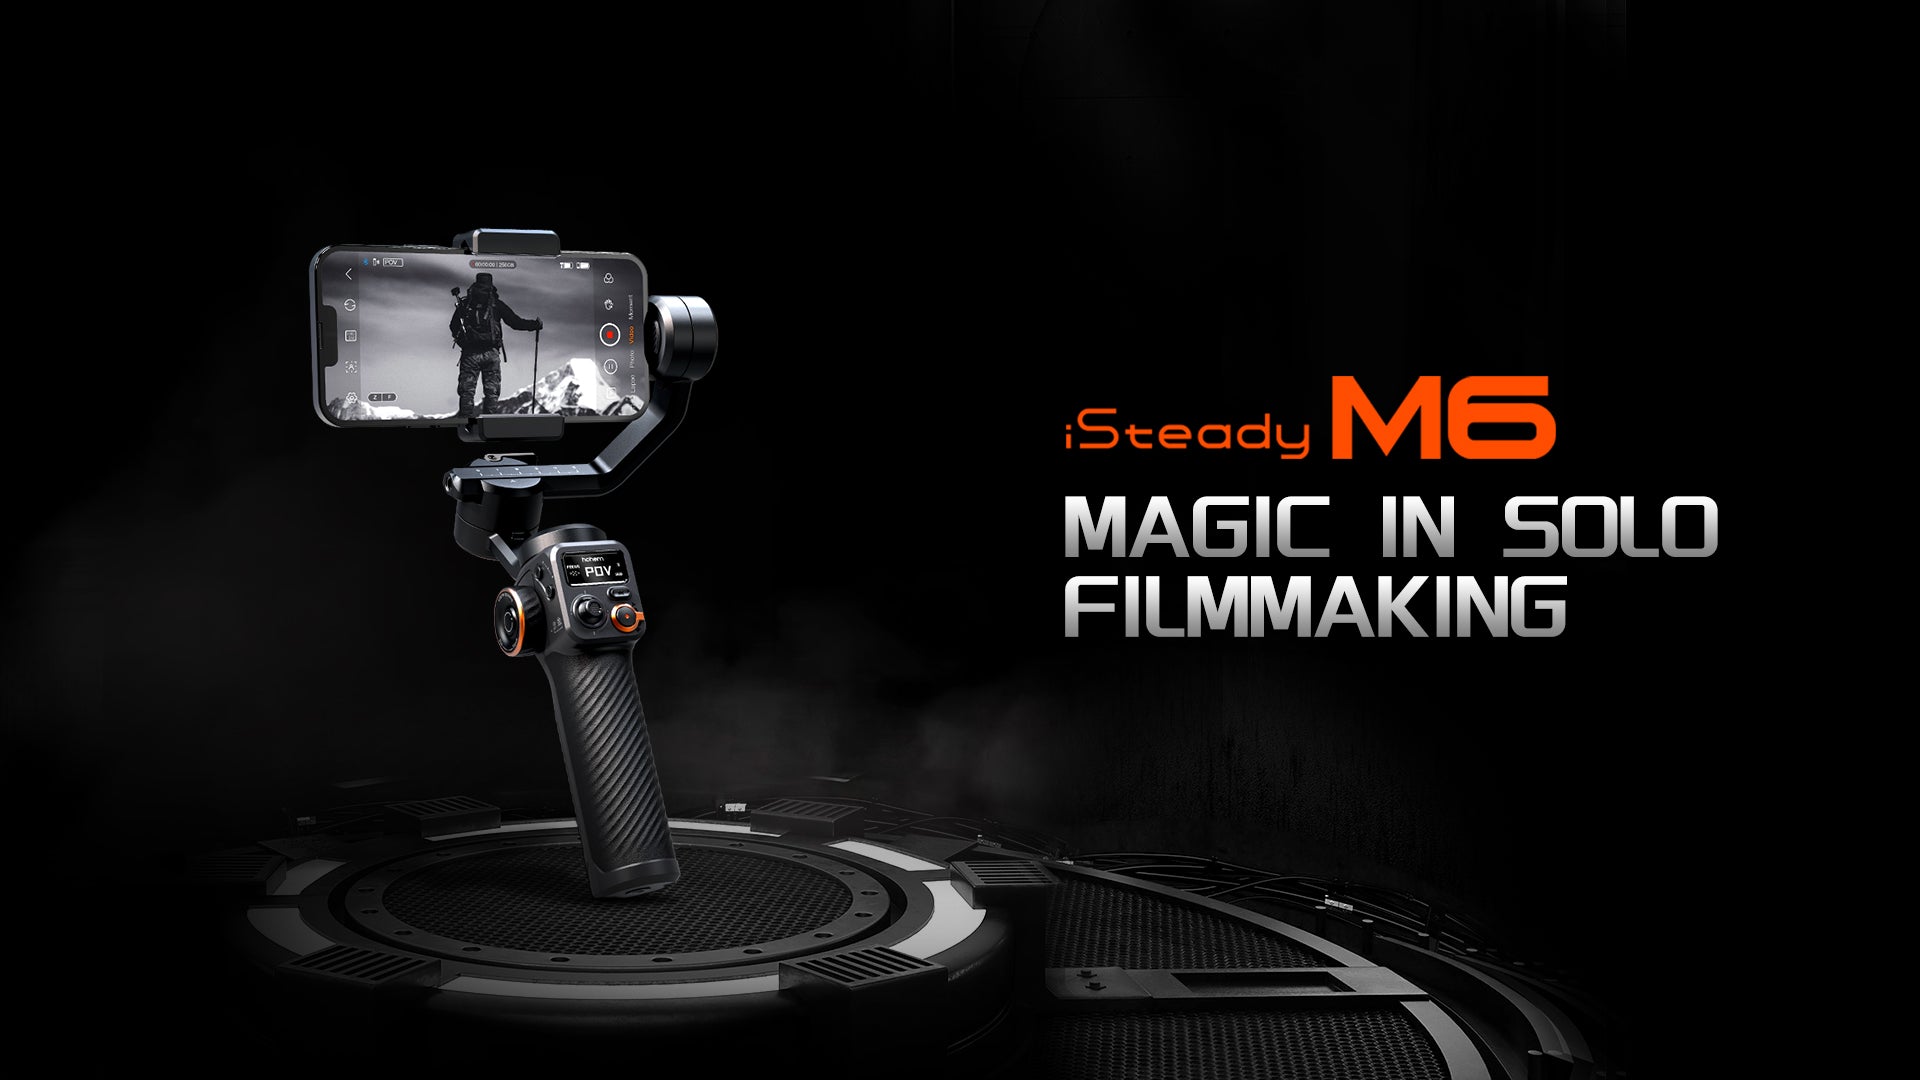 Hohem iSteady M6 Kit in test: image stabilization at the push of a button?